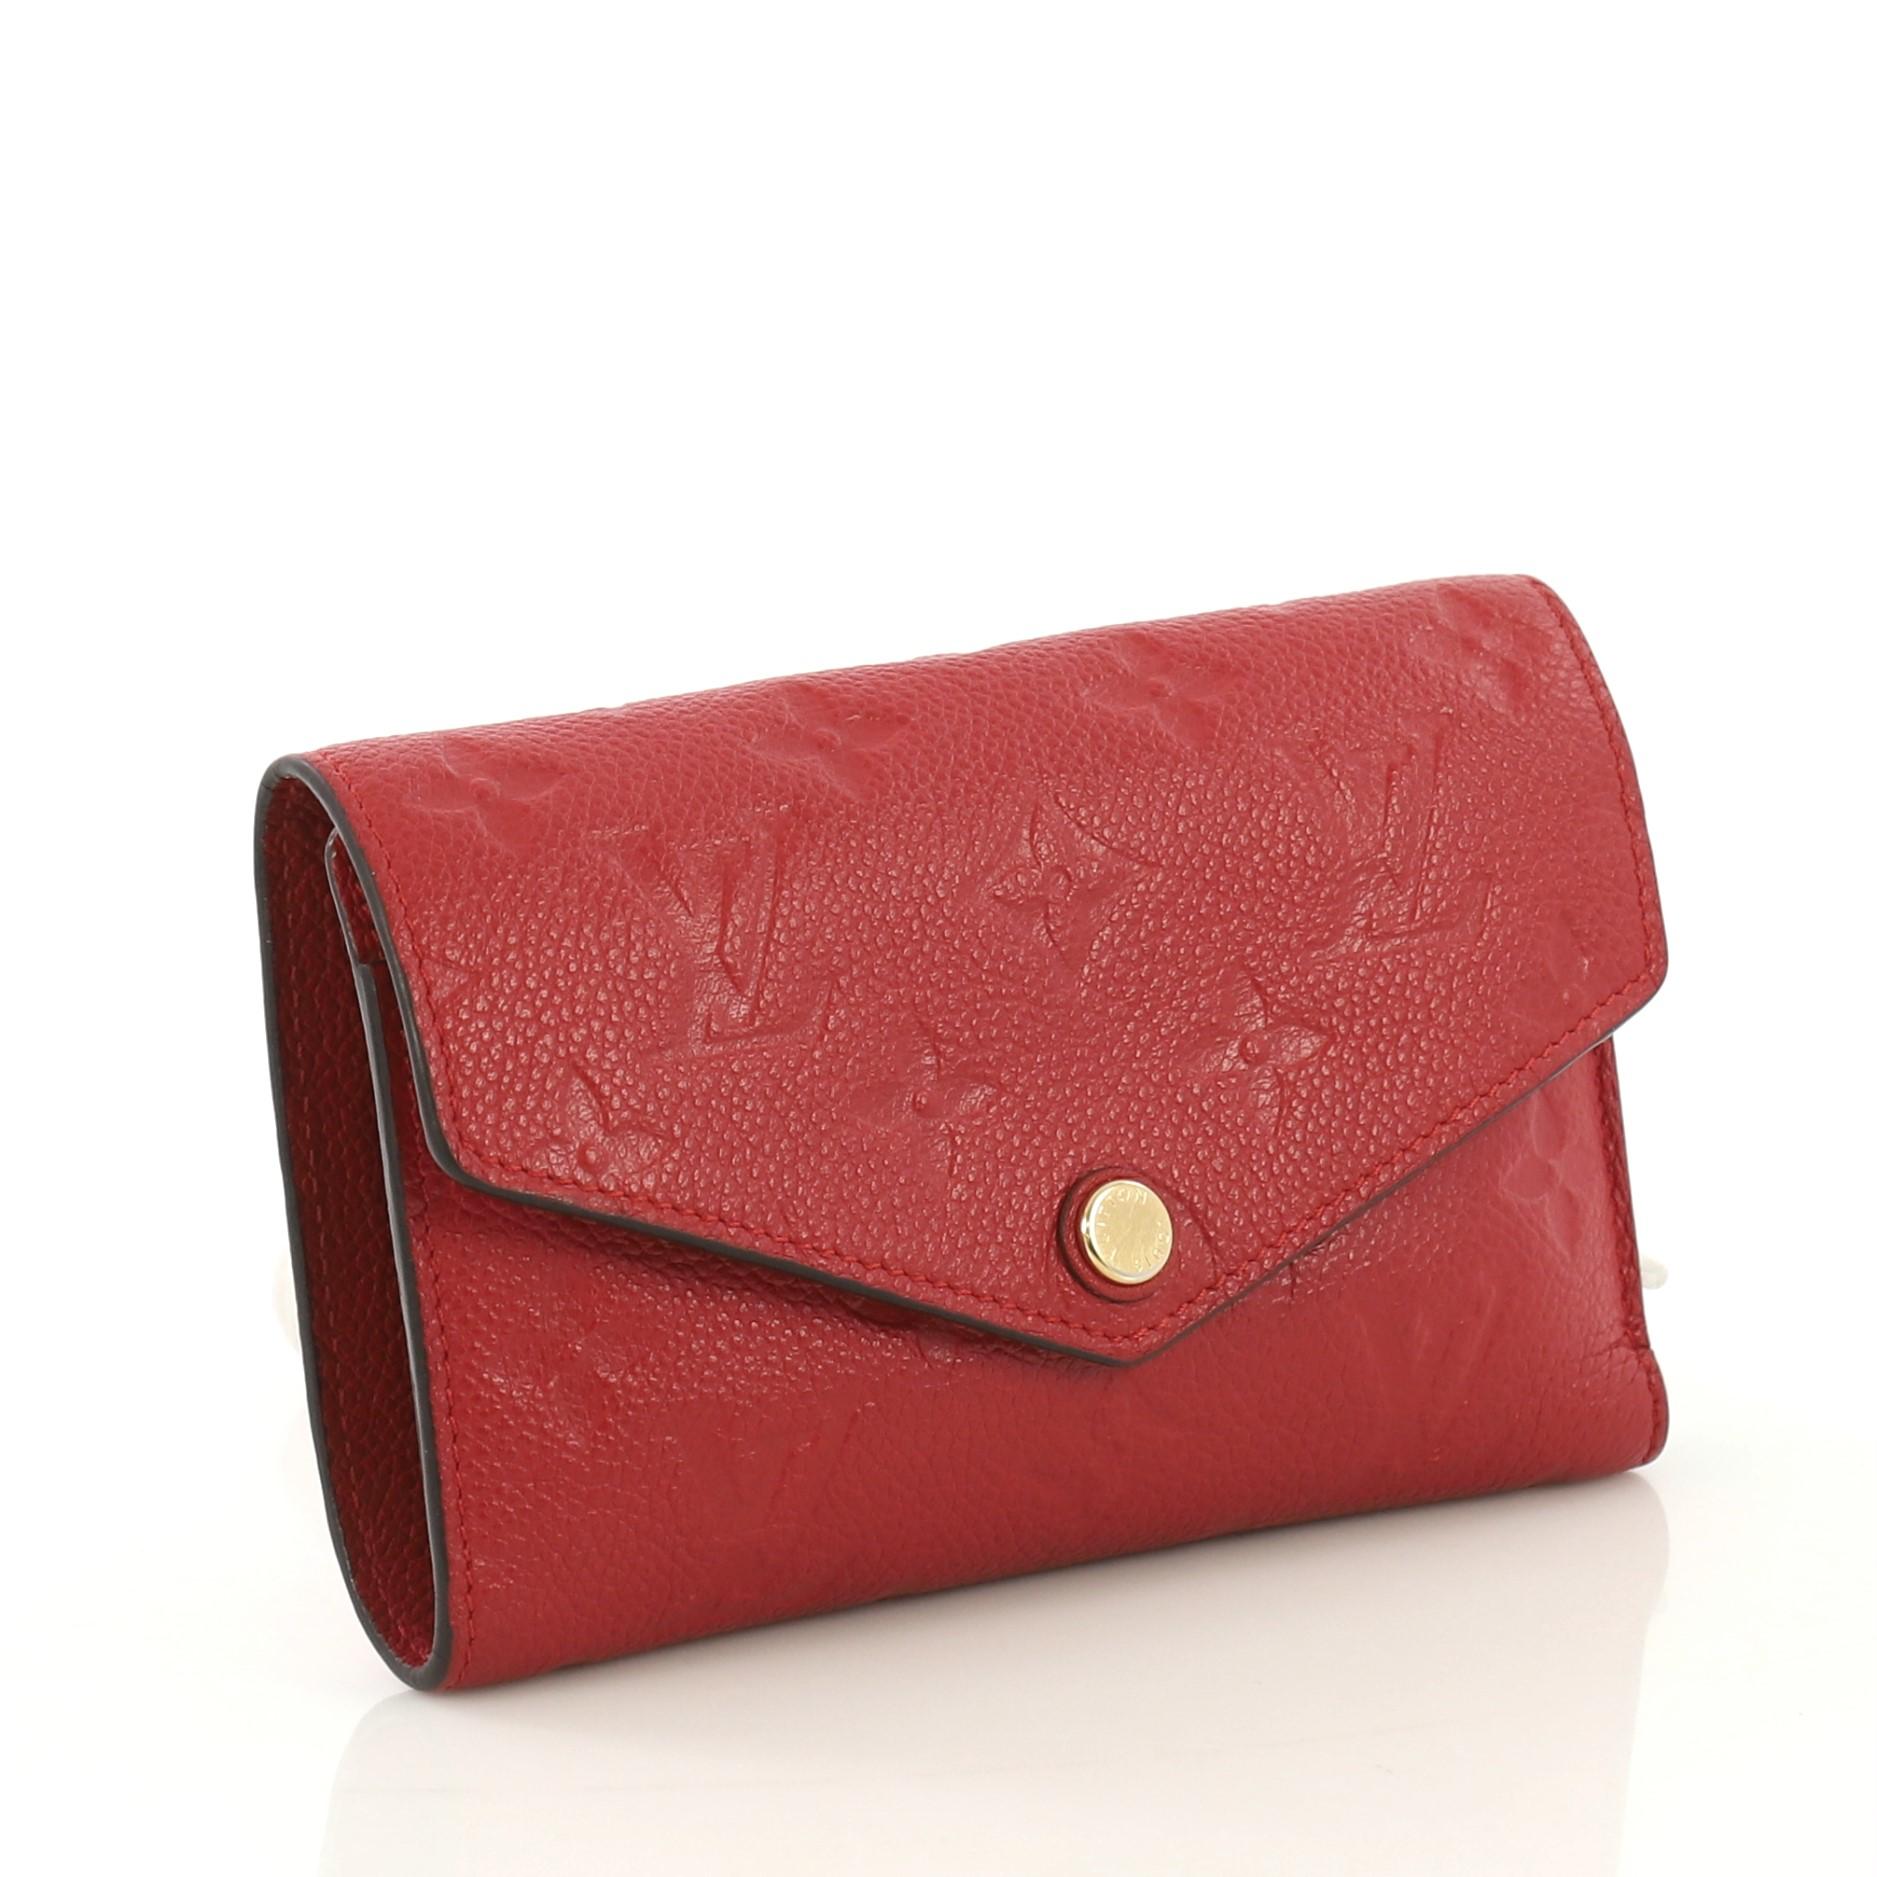 This Louis Vuitton Compact Curieuse Wallet Monogram Empreinte Leather, crafted from red monogram empreinte leather, features frontal flap and gold-tone hardware. Its press button closure opens to a red leather interior with multiple card slots,